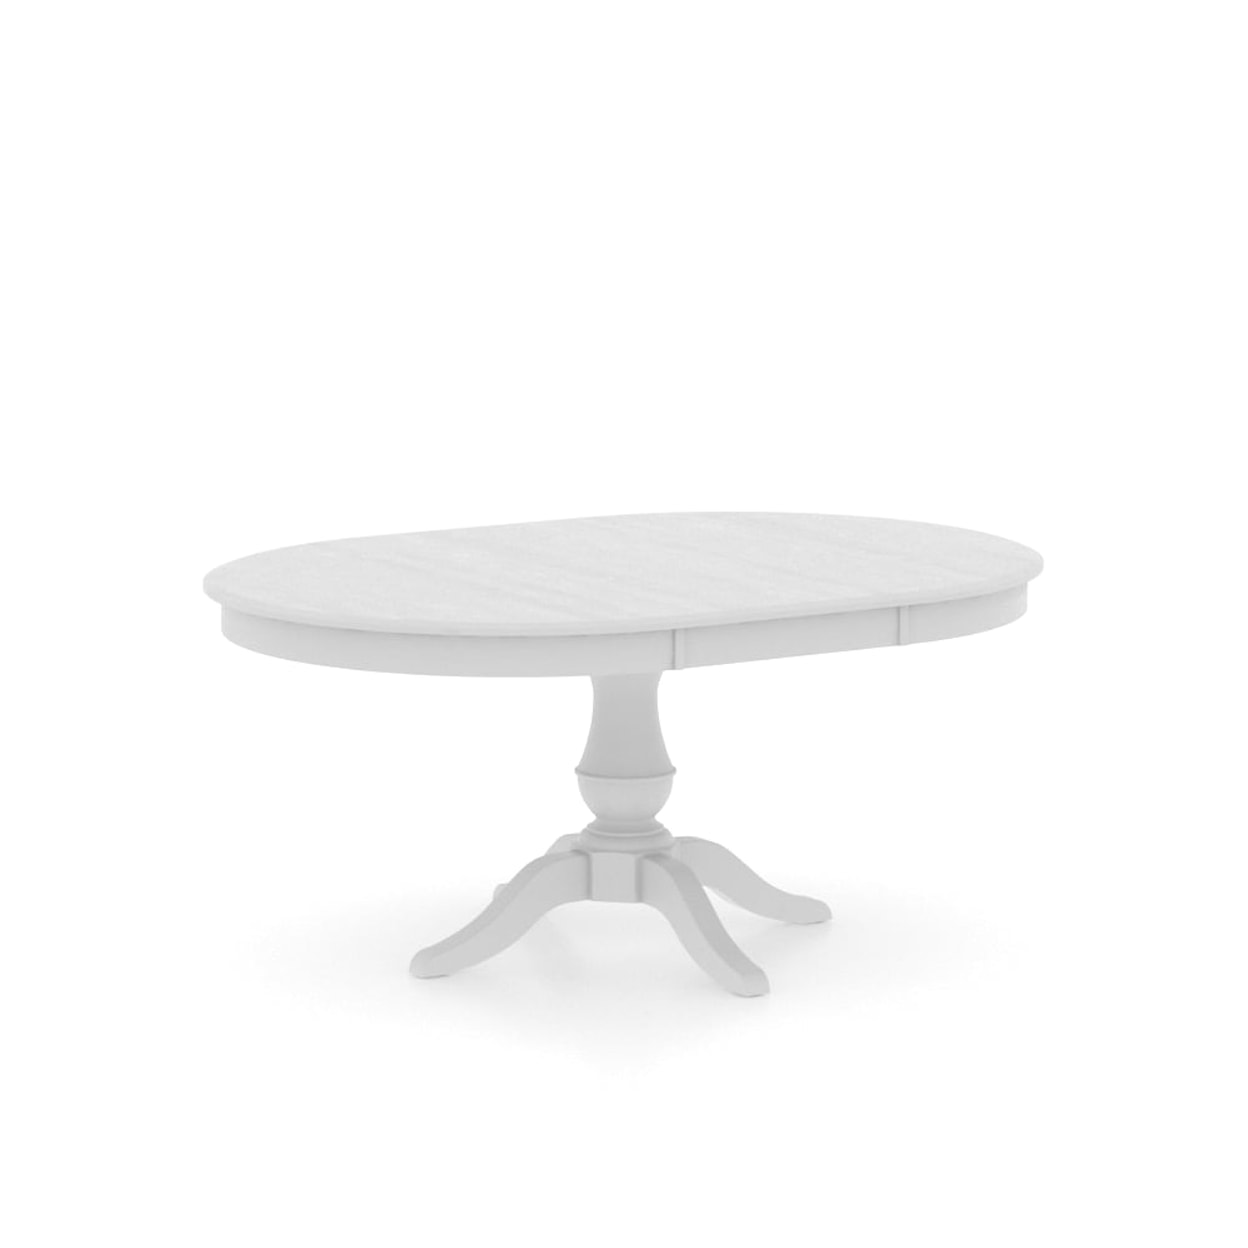 Canadel Gourmet - Custom Dining Customizable Round Pedestal Table with Leaf